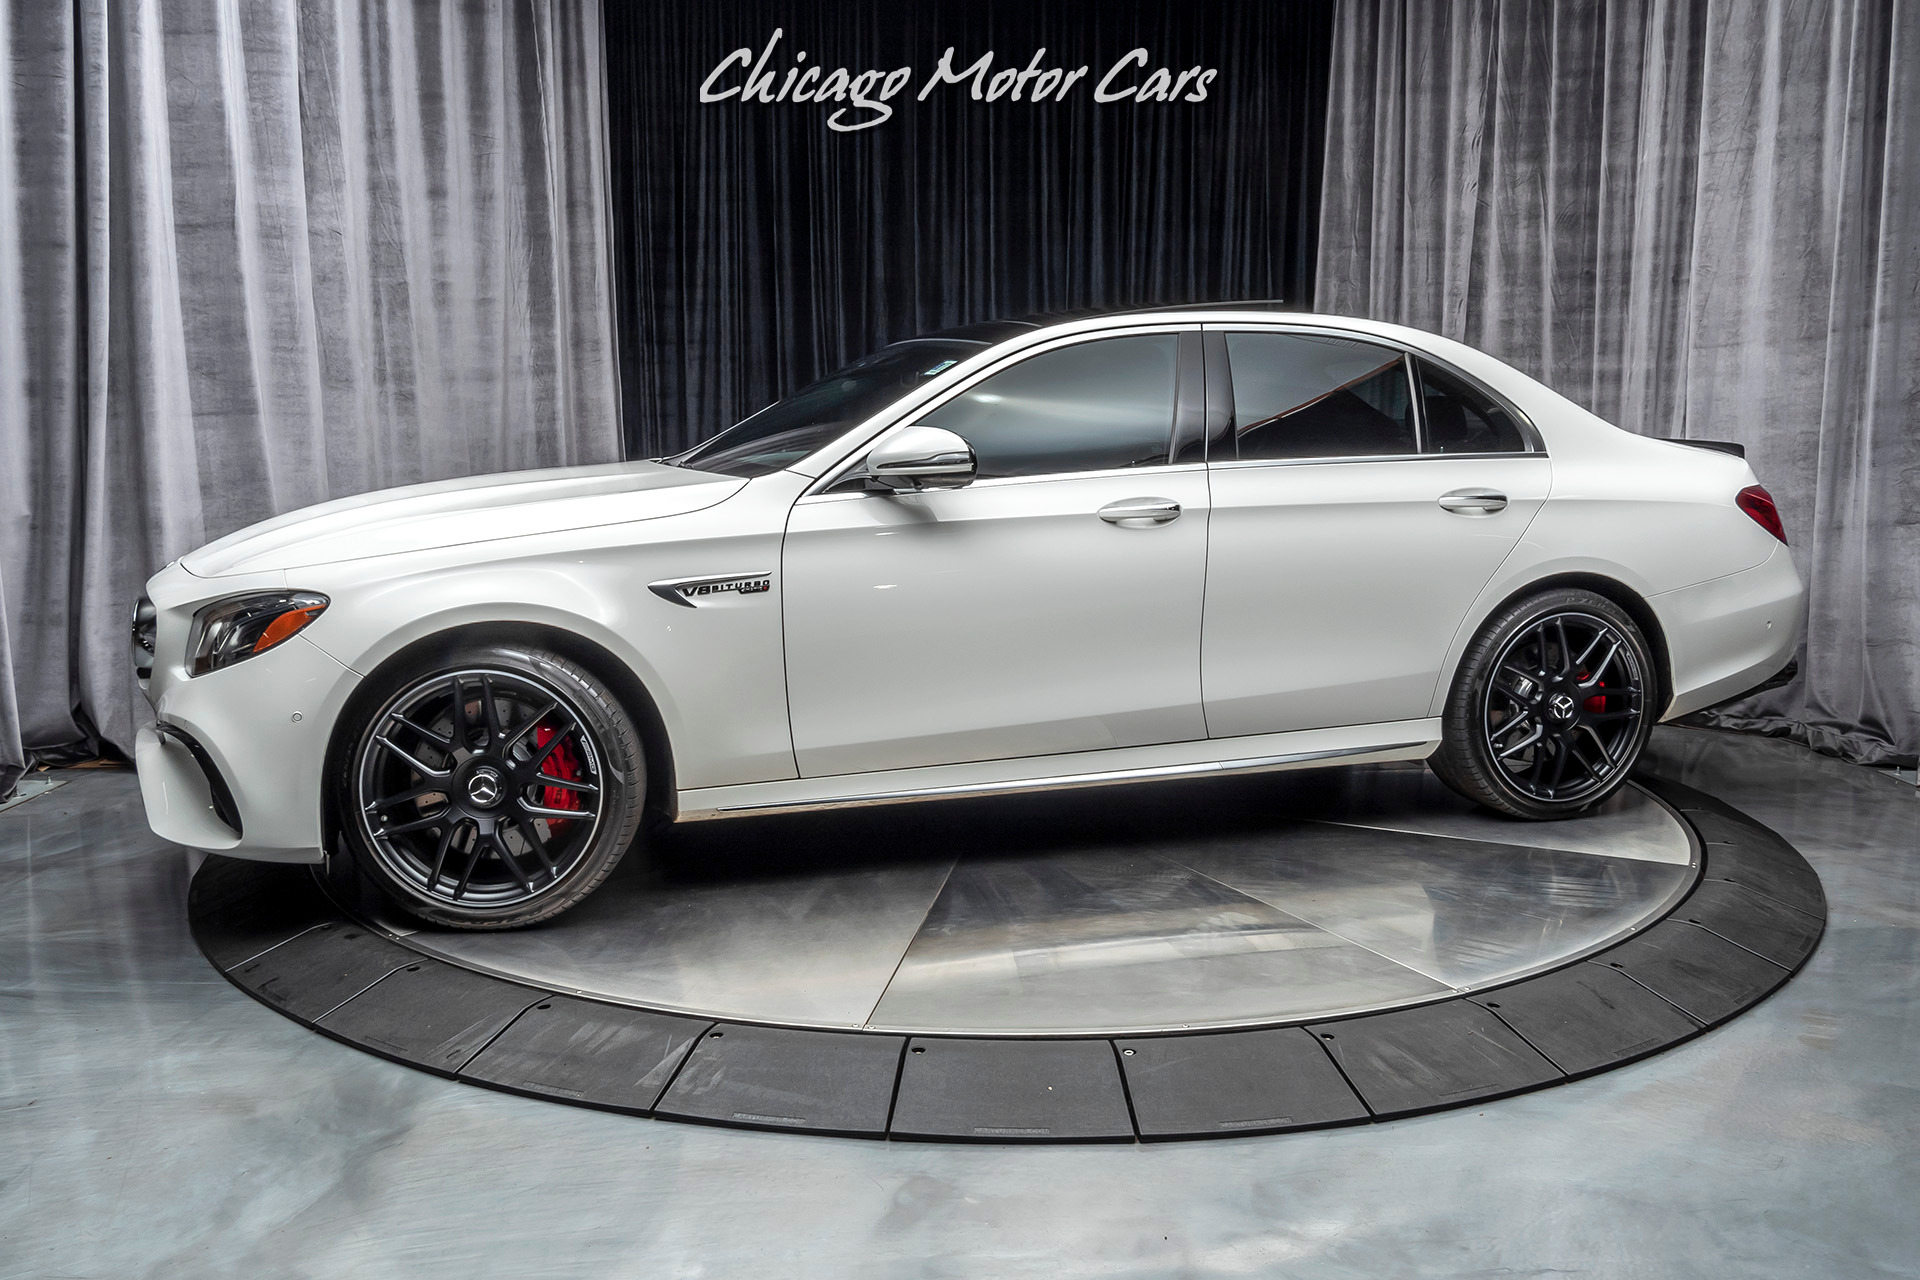 Used 2019 Mercedes-Benz E63 S AMG Sedan LOADED! CARBON FIBER + PERFORMANCE  EXHAUST! For Sale (Special Pricing) | Chicago Motor Cars Stock #16337B